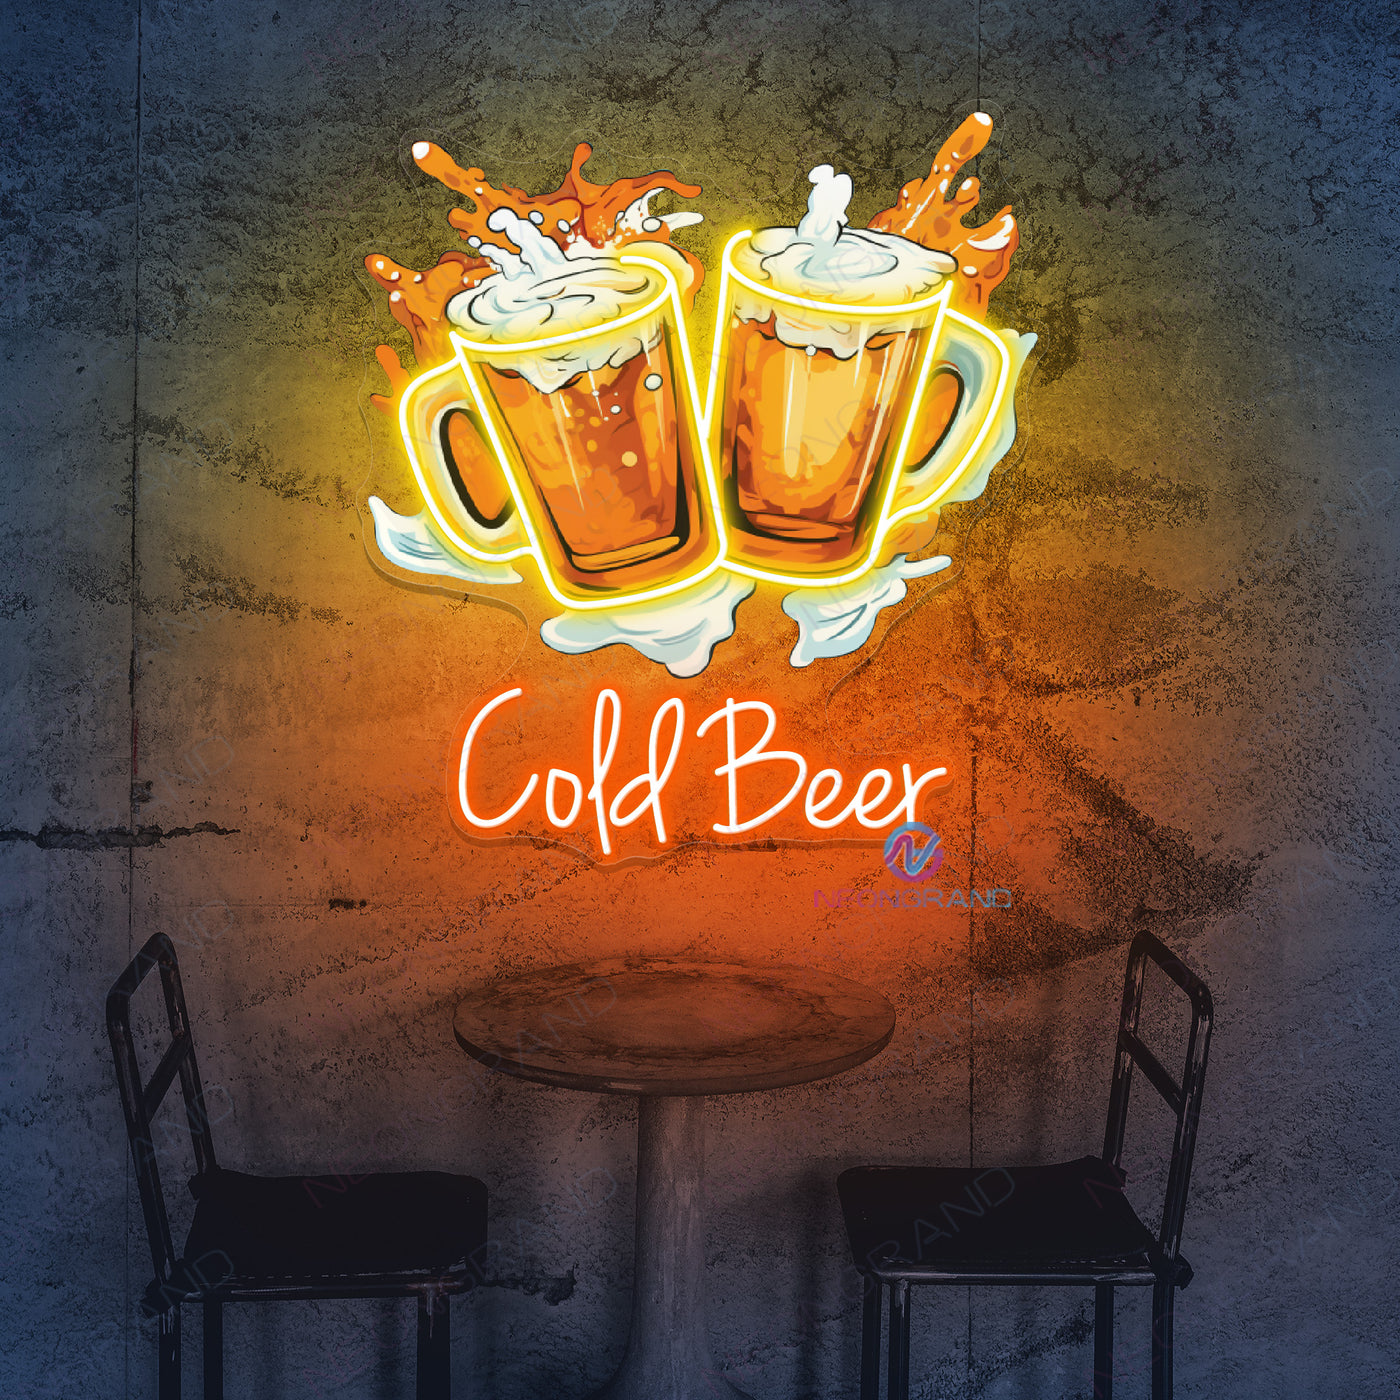 Cold Beer Neon Sign Drinking Led Light